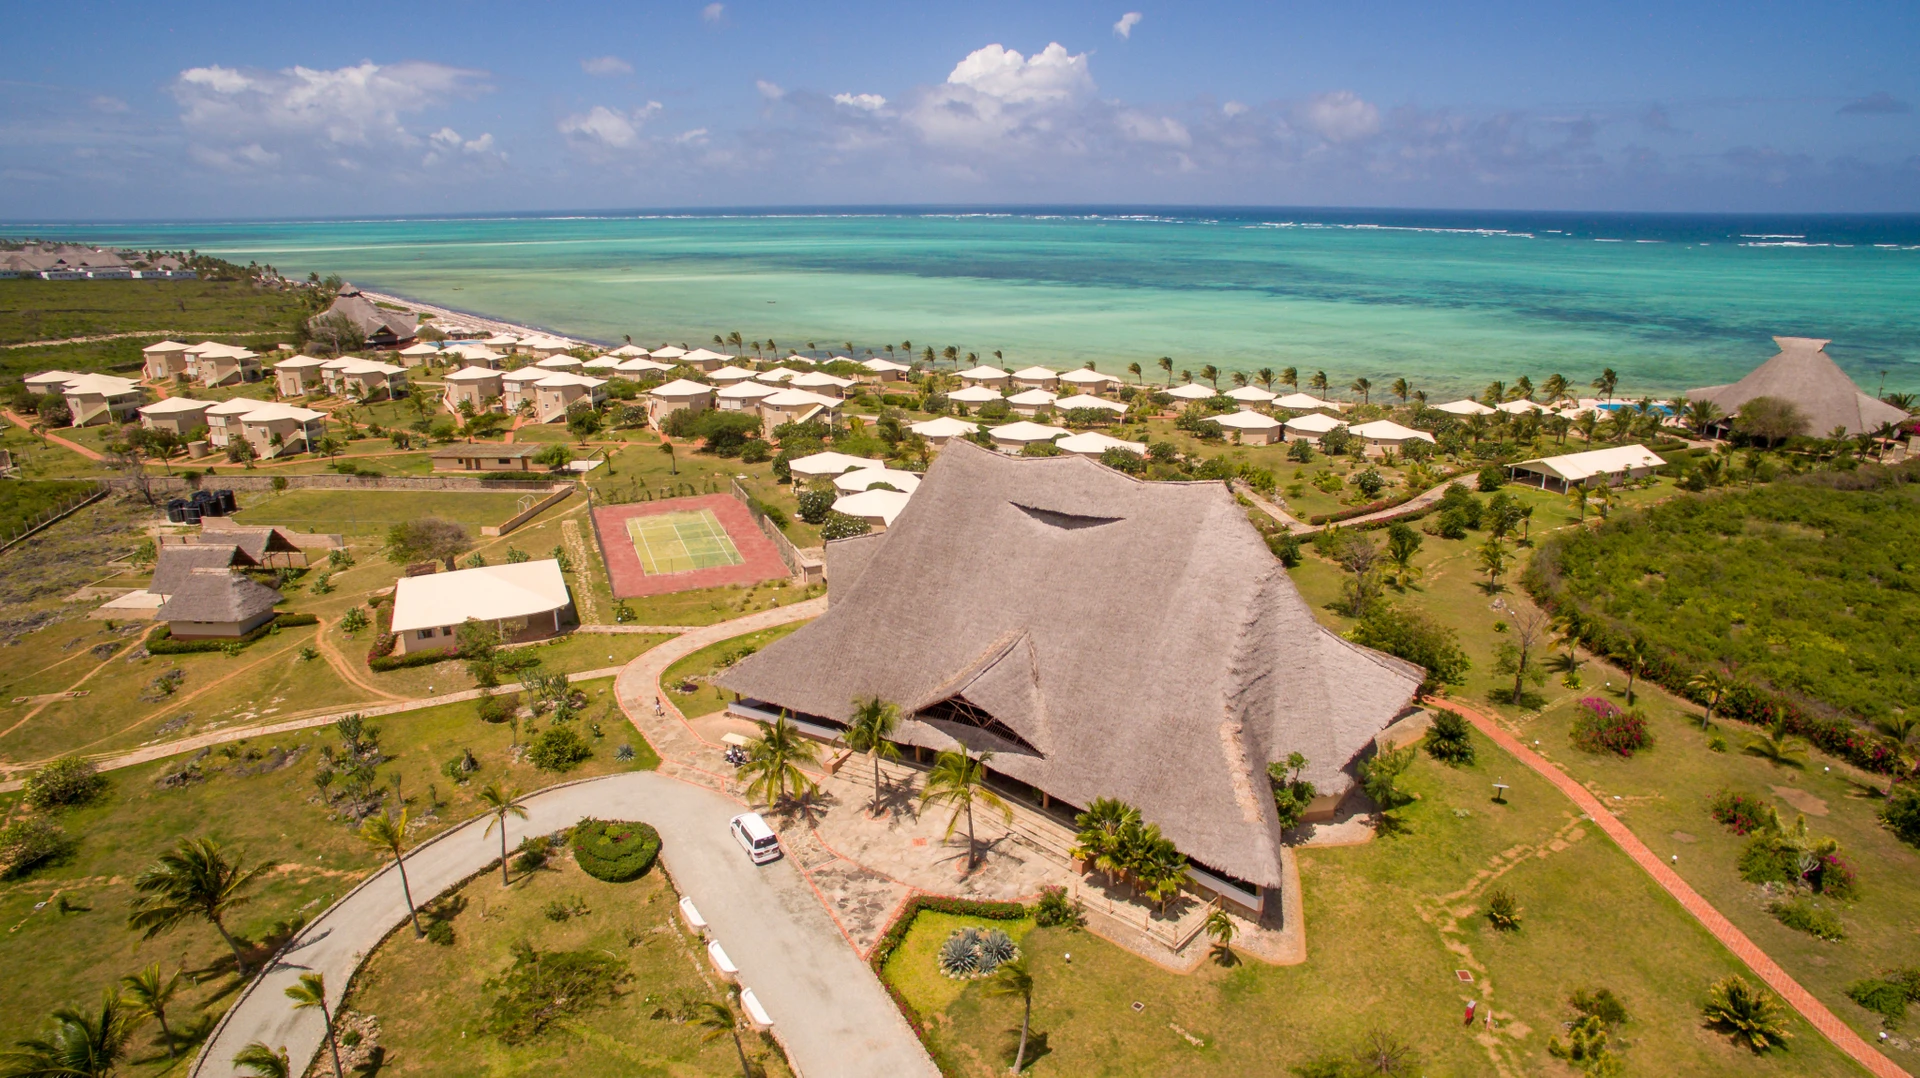 Aerial View of The One Watamu Bay Resort. Special Fractional Membership deal being offered by African Resort Institute